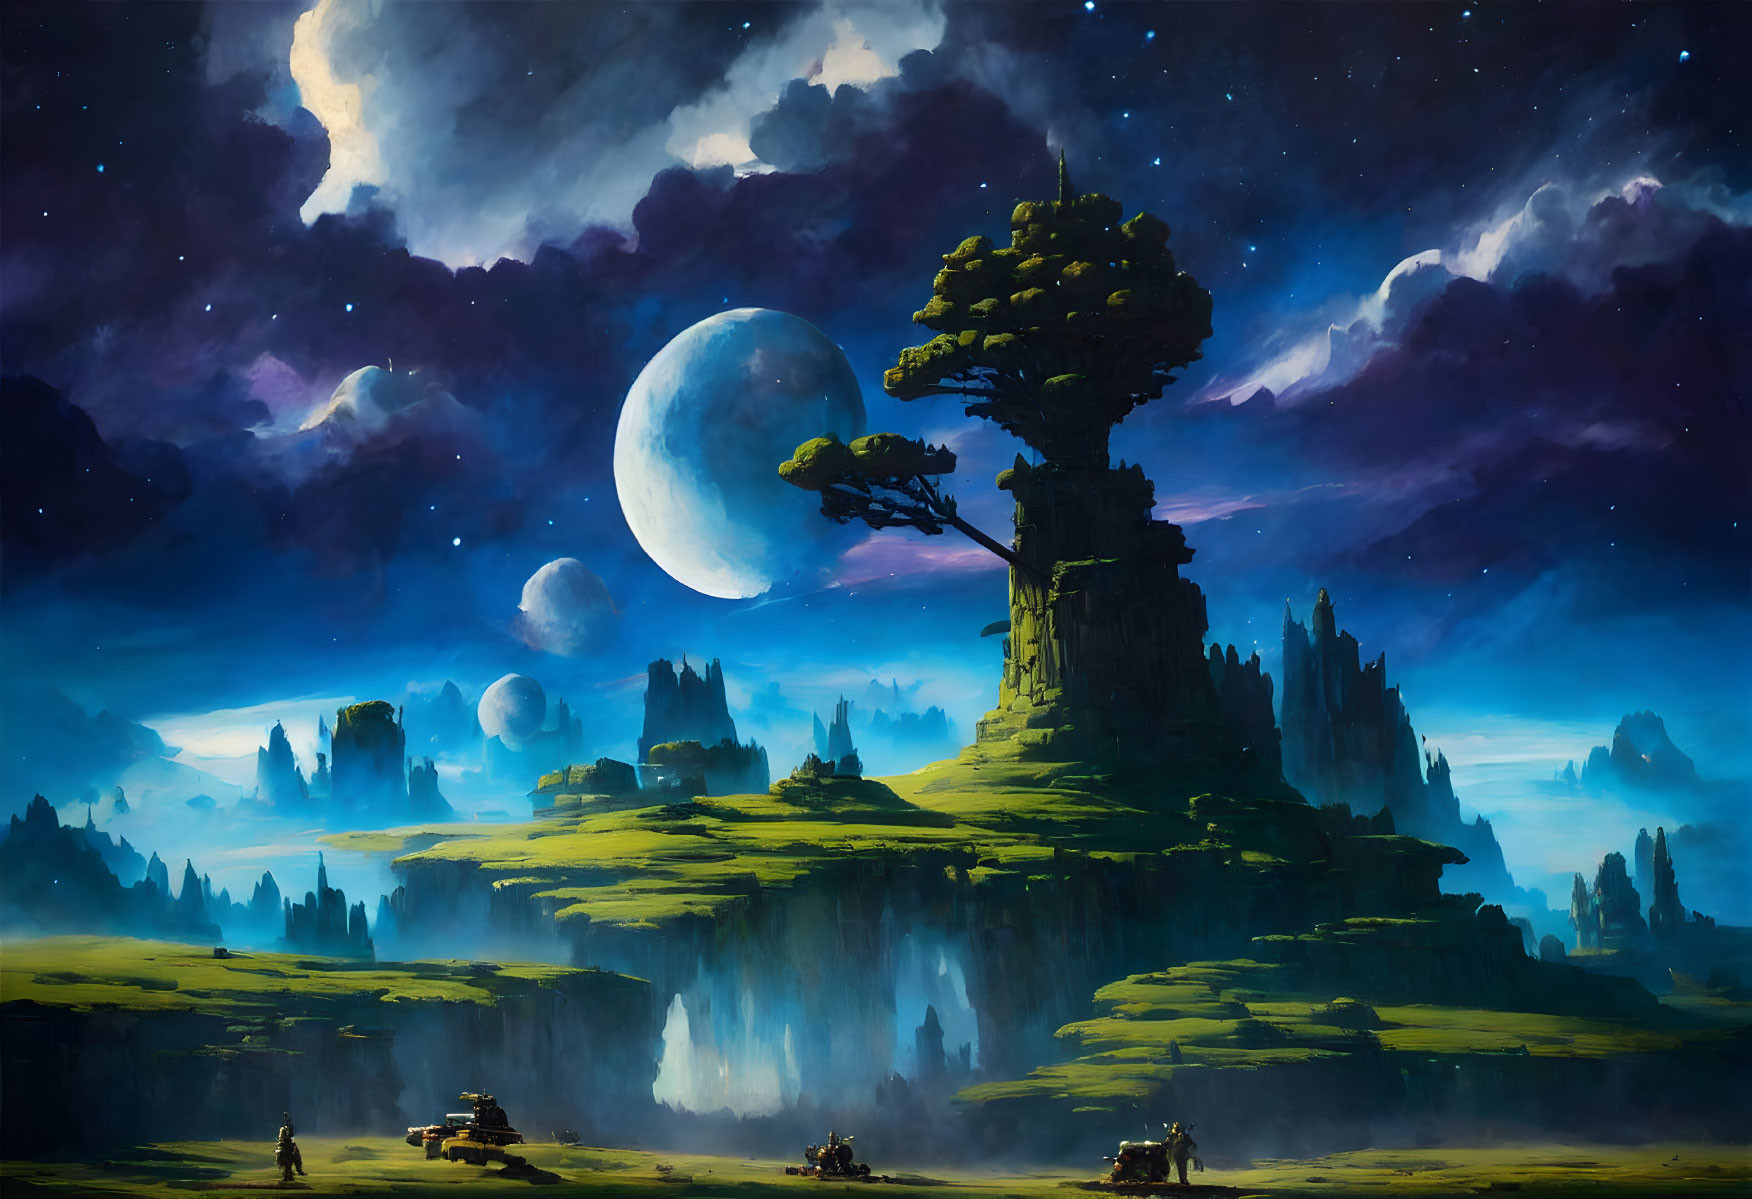 Fantastical night landscape with giant tree on floating island, moon, stars, figures with lanterns